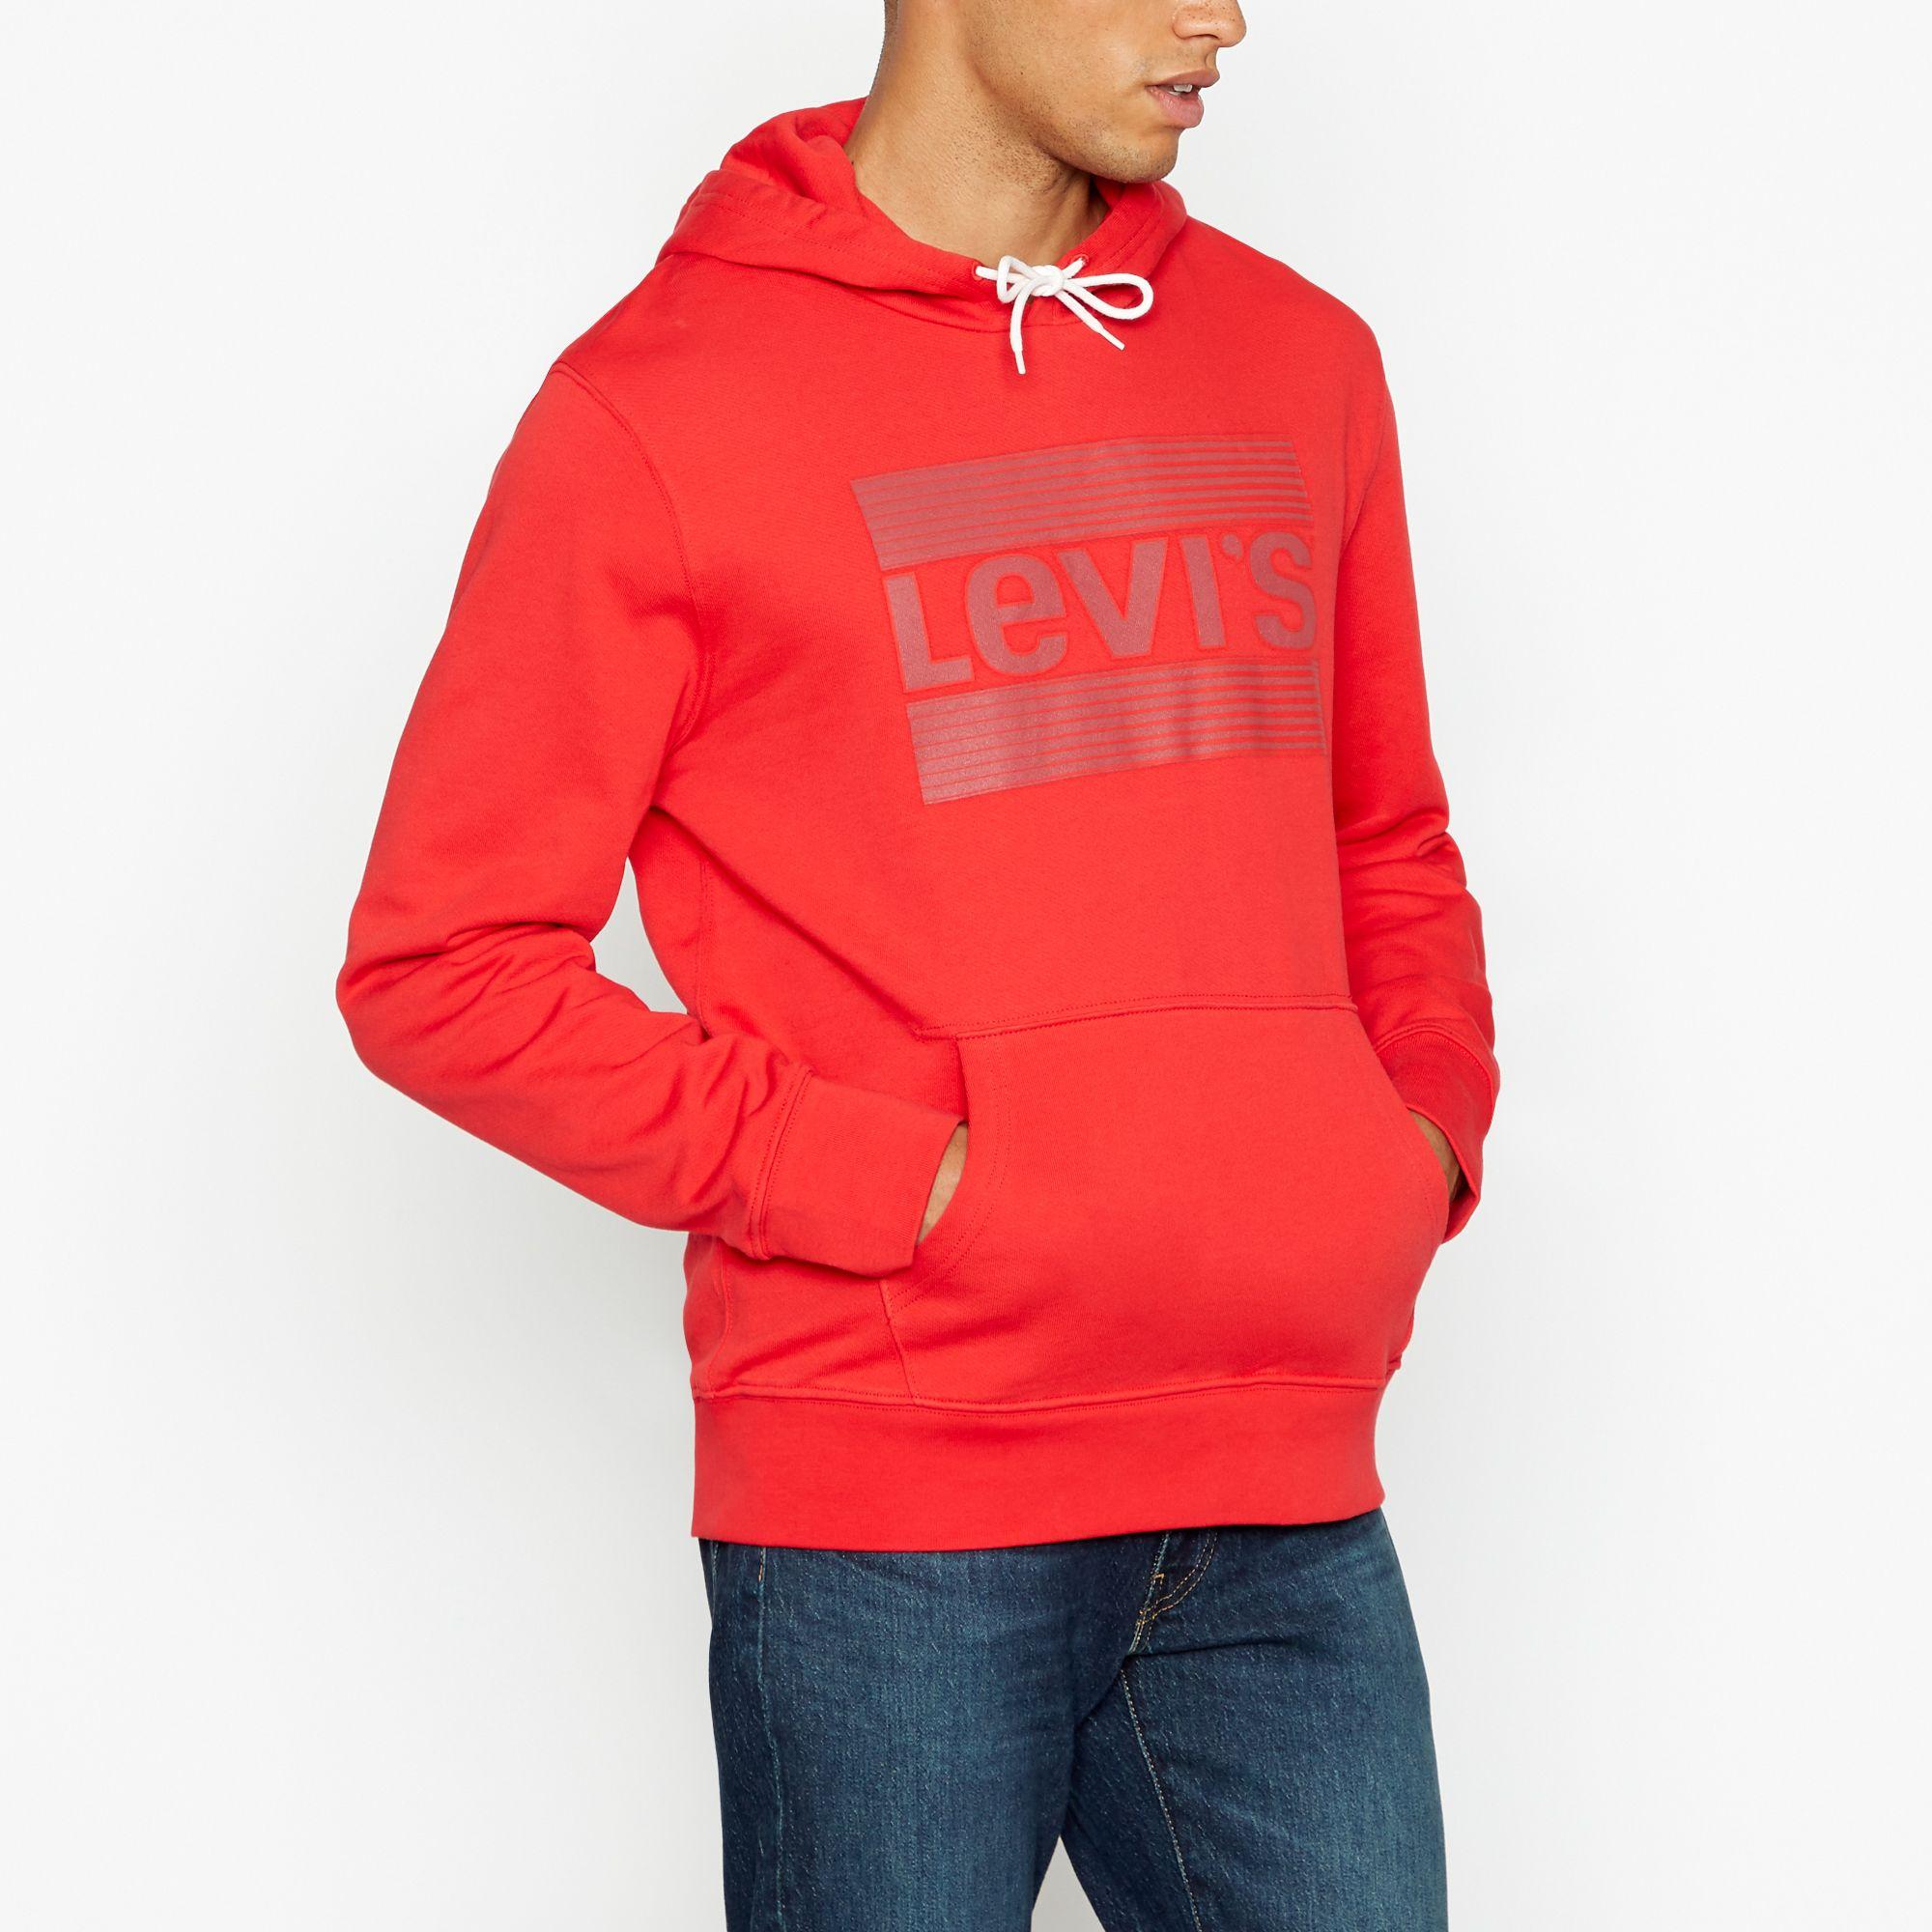 Levi's Cotton Logo Pattern Hoodie in Red for Men - Lyst